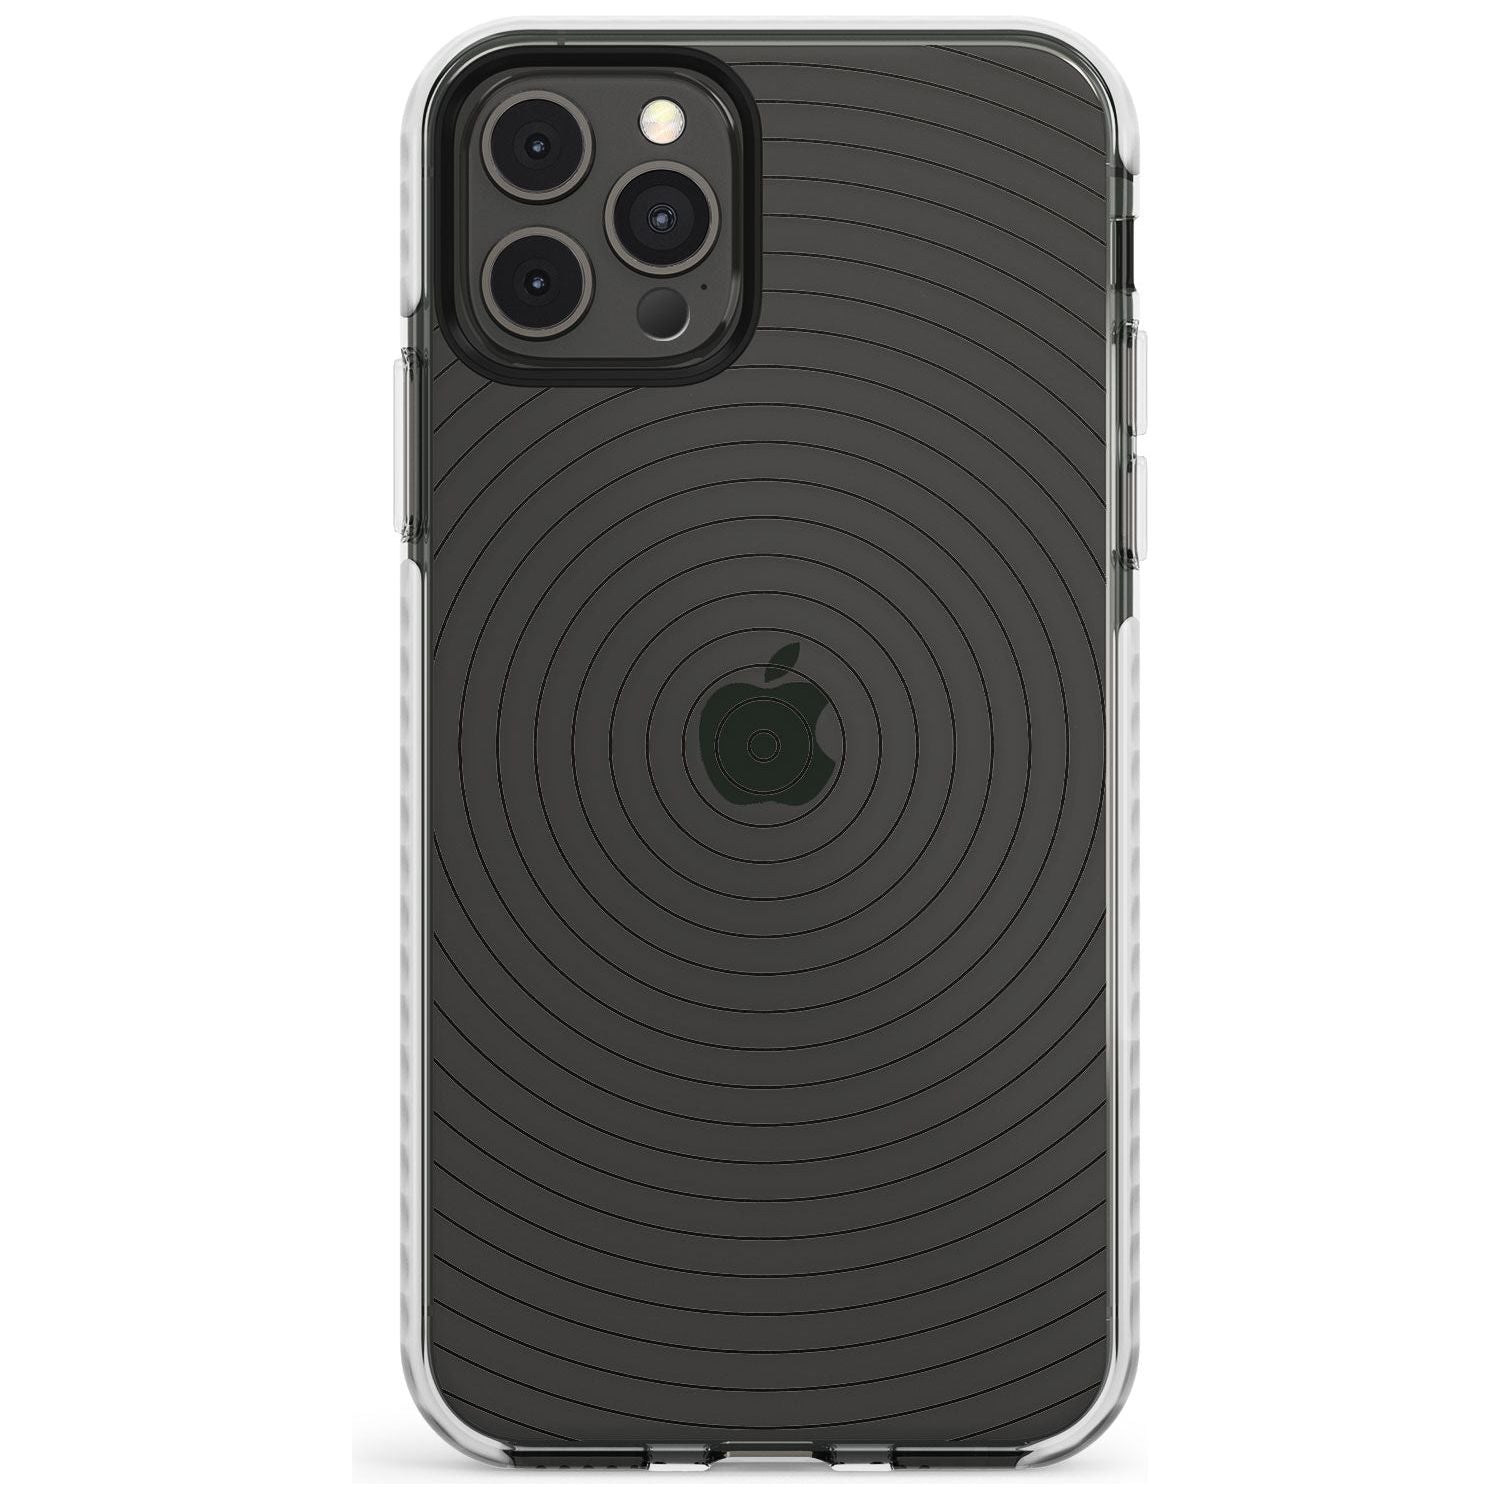 Abstract Lines: Circles Slim TPU Phone Case for iPhone 11 Pro Max